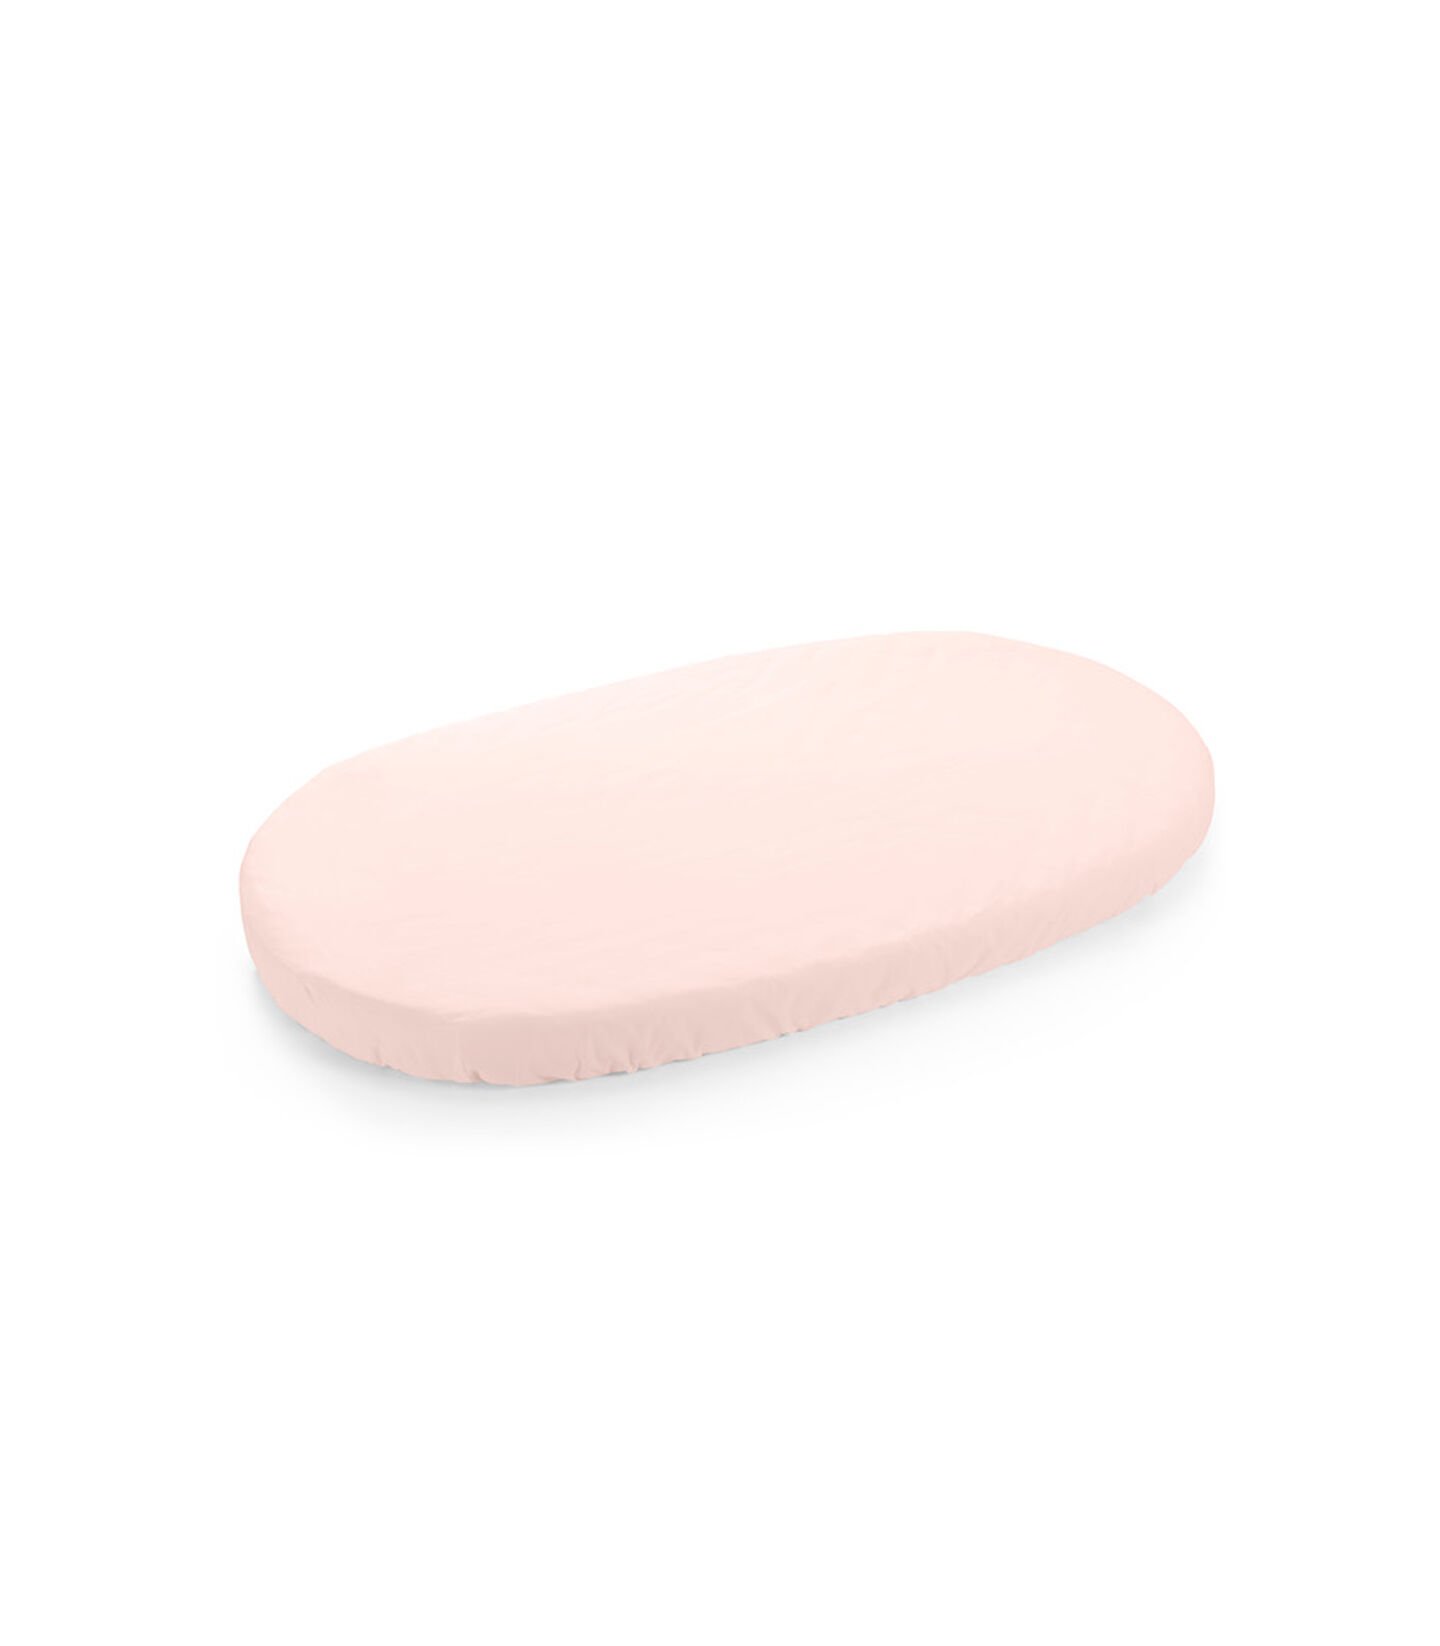 Stokke® Sleepi™ Fitted Sheet Pink, Rose pêche, mainview view 1